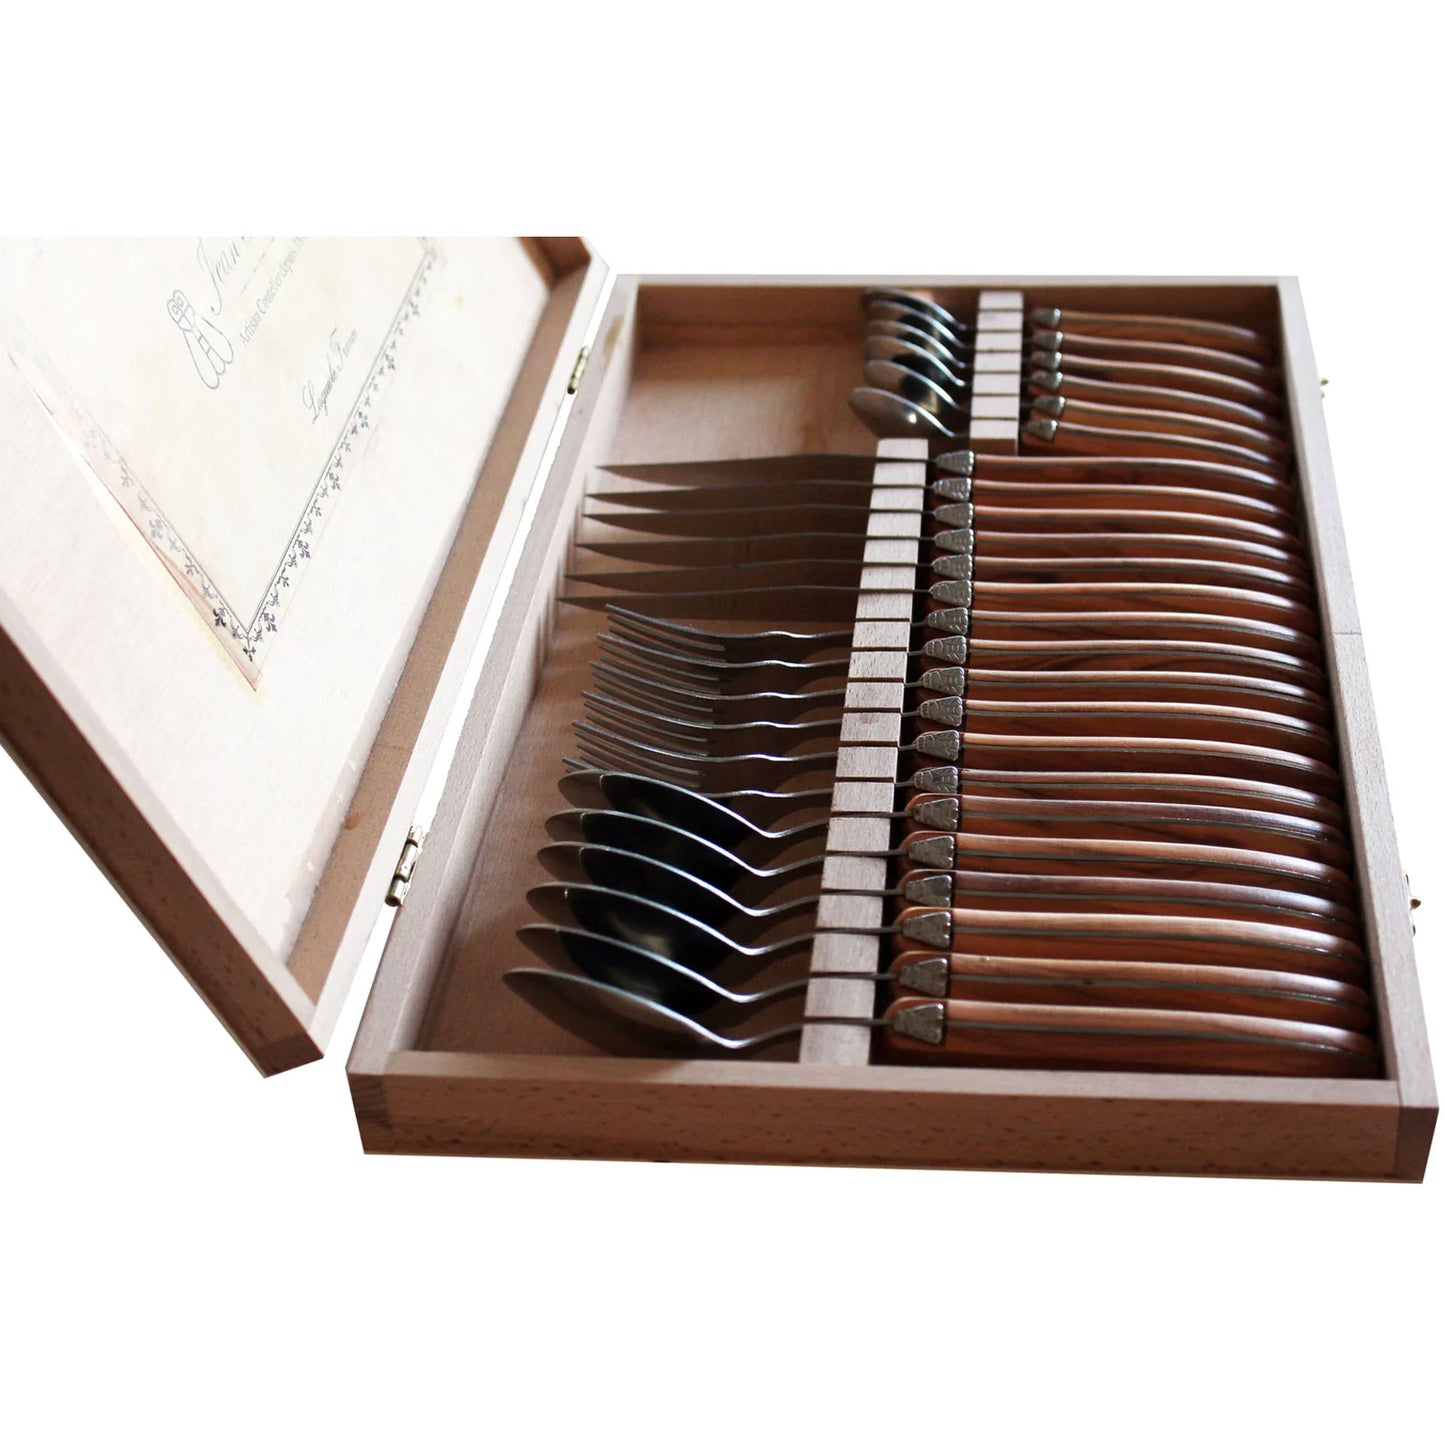 Laguiole Flatware in Olivewood with Presentation Box, 24 Pc.